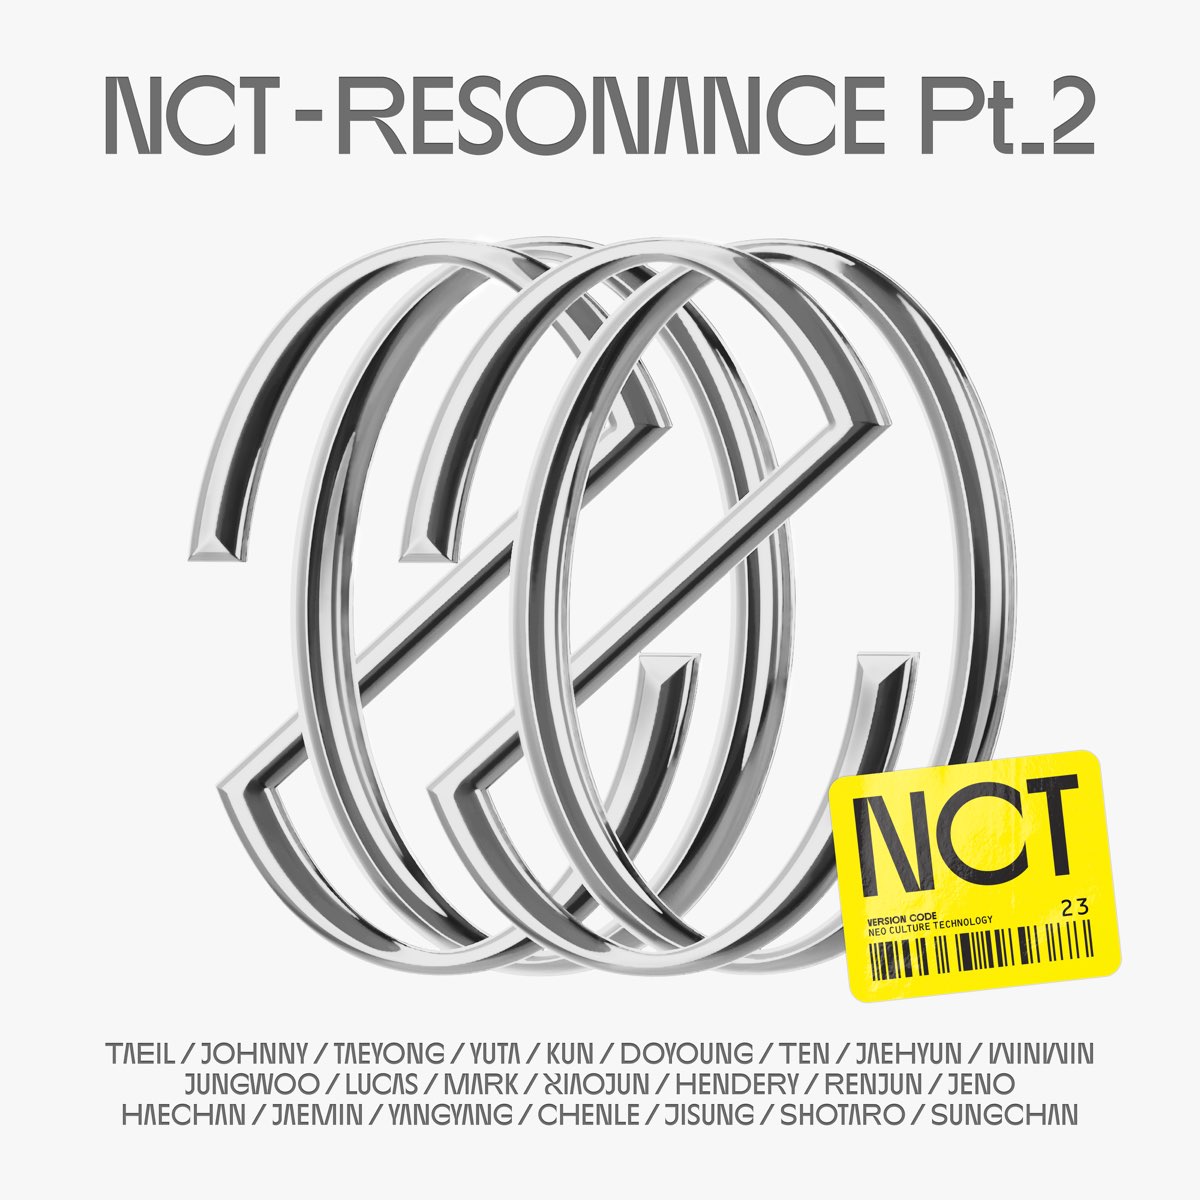 NCT RESONANCE Pt. 2 - The 2nd Album by NCT on Apple Music